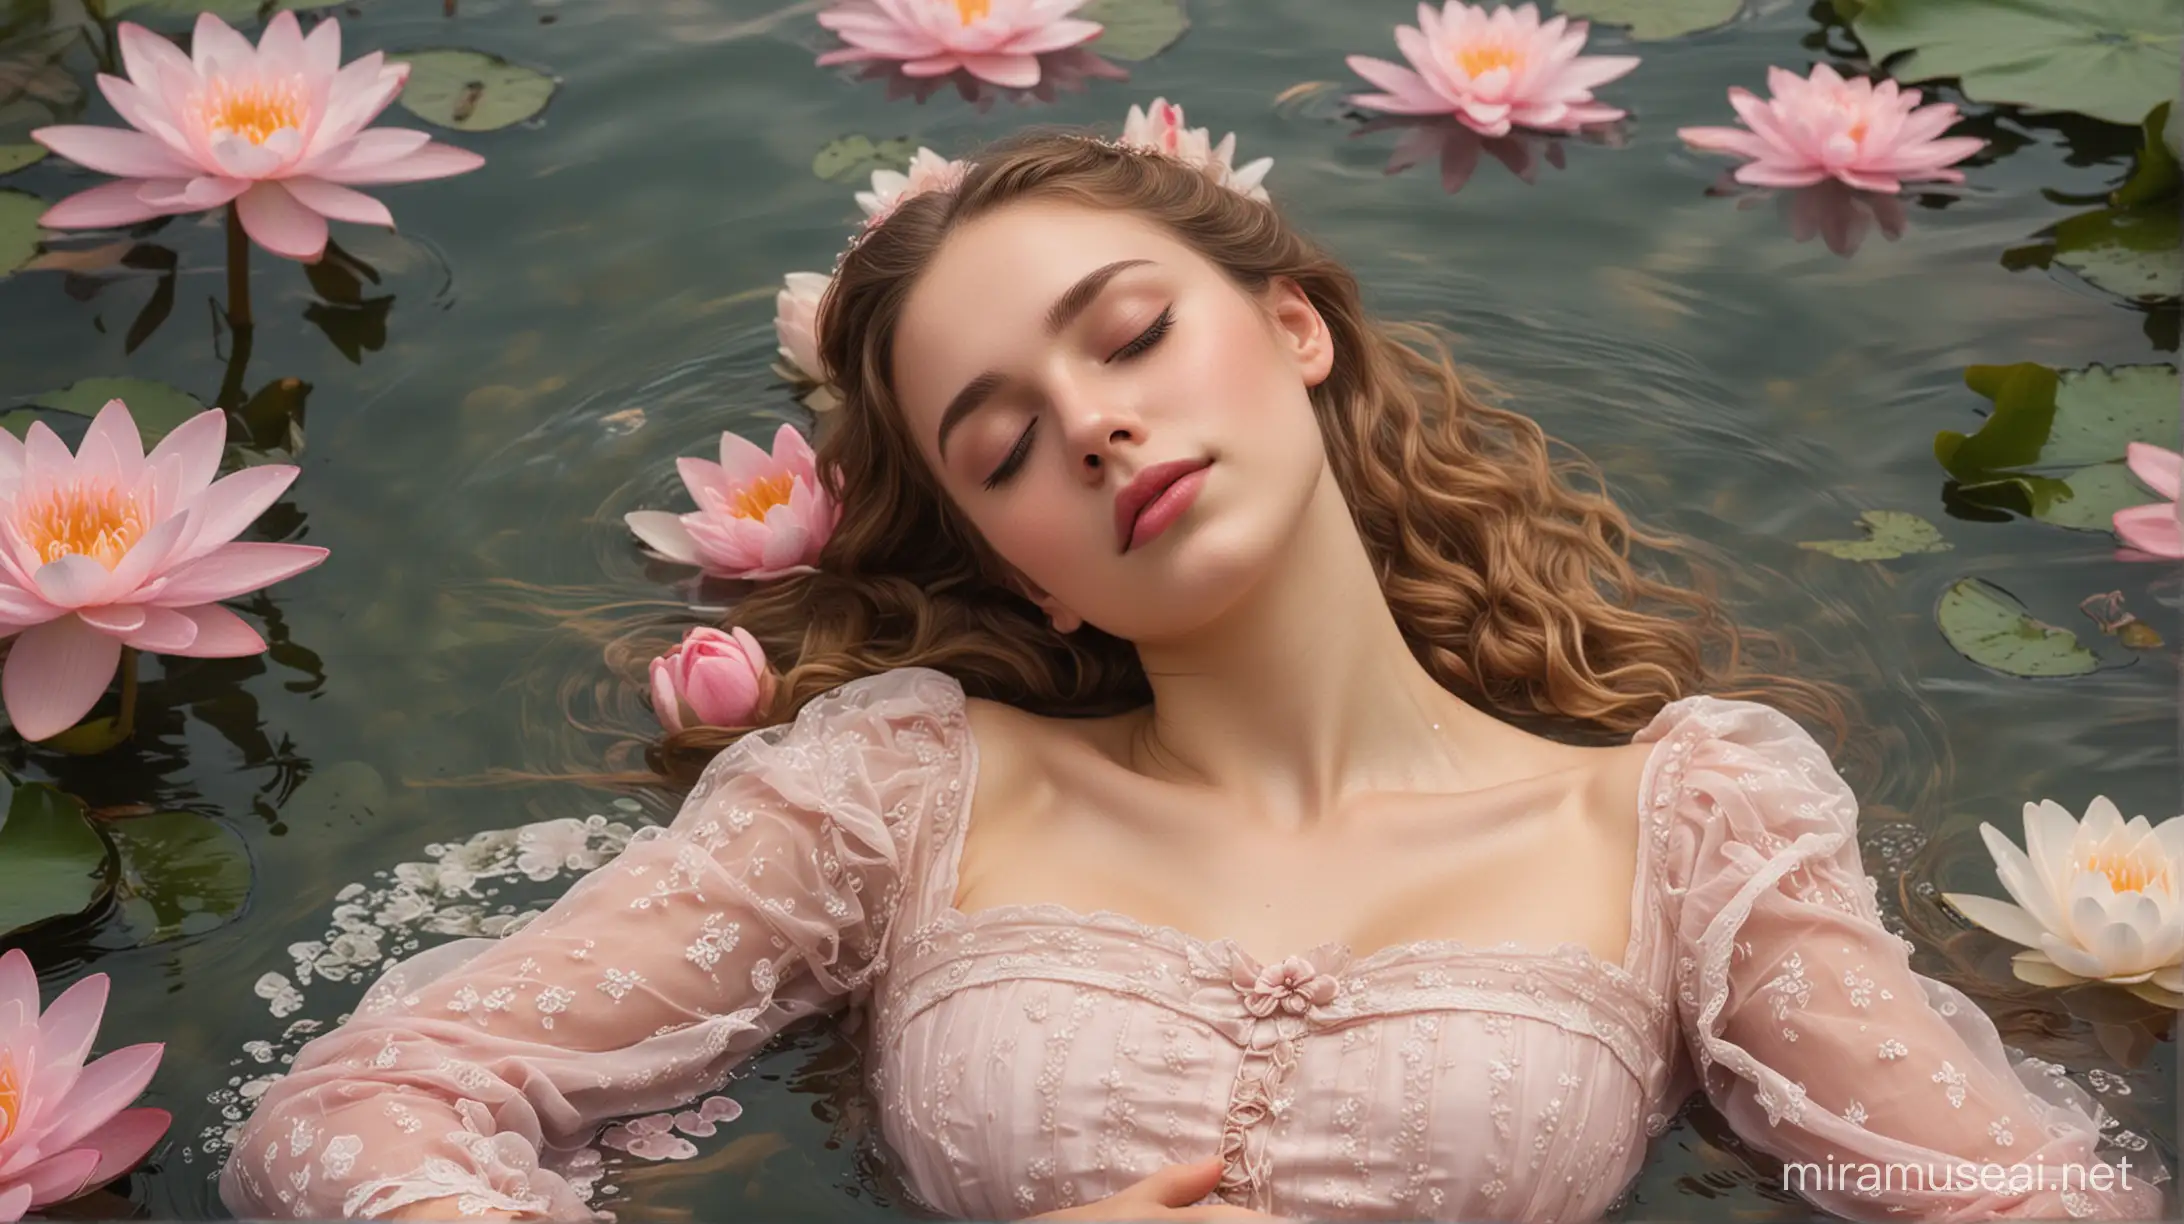 Enchanting 19th Century Beauty Young Woman Amid Pink Water Lilies